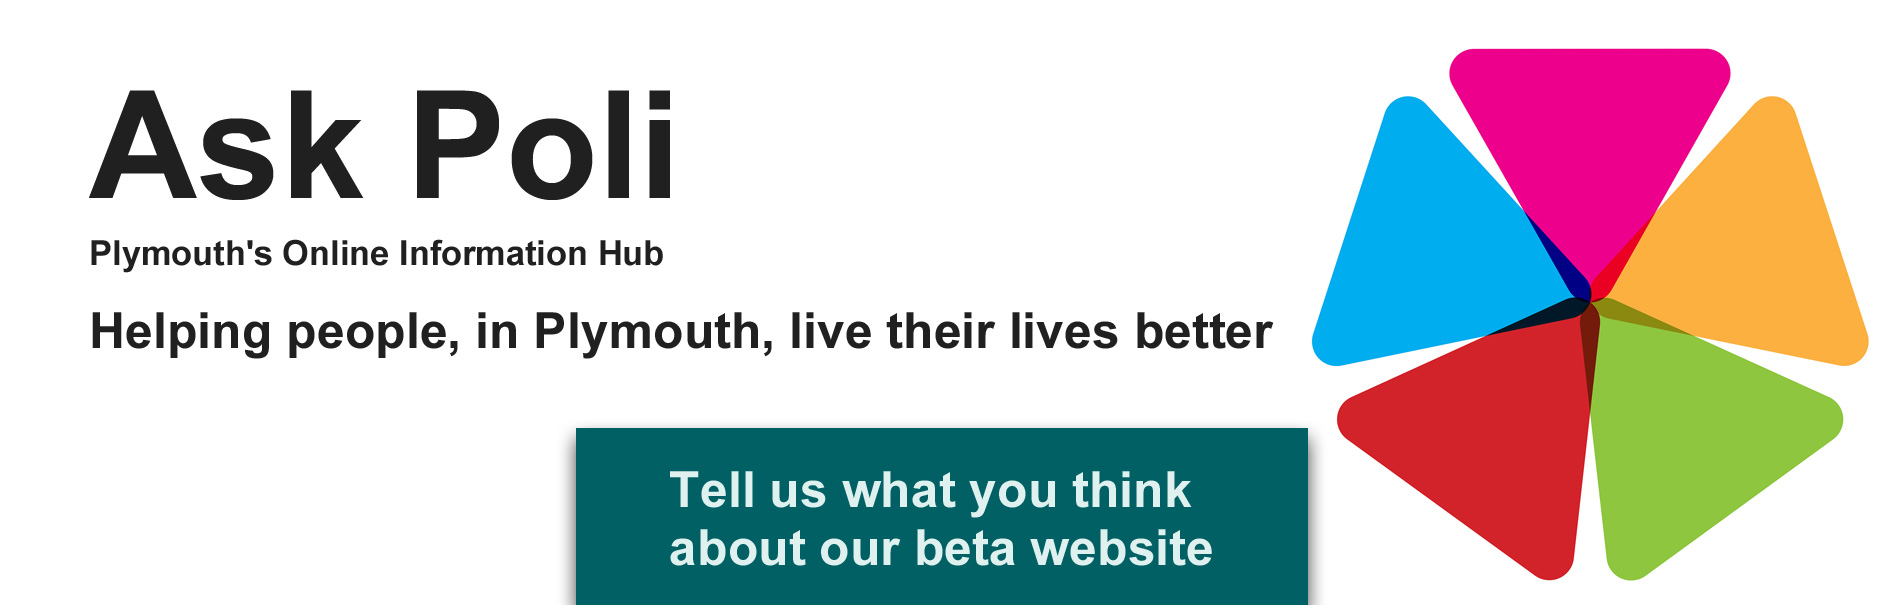 Promotional banner that links to a page where you can tell us what you think of our beta website.